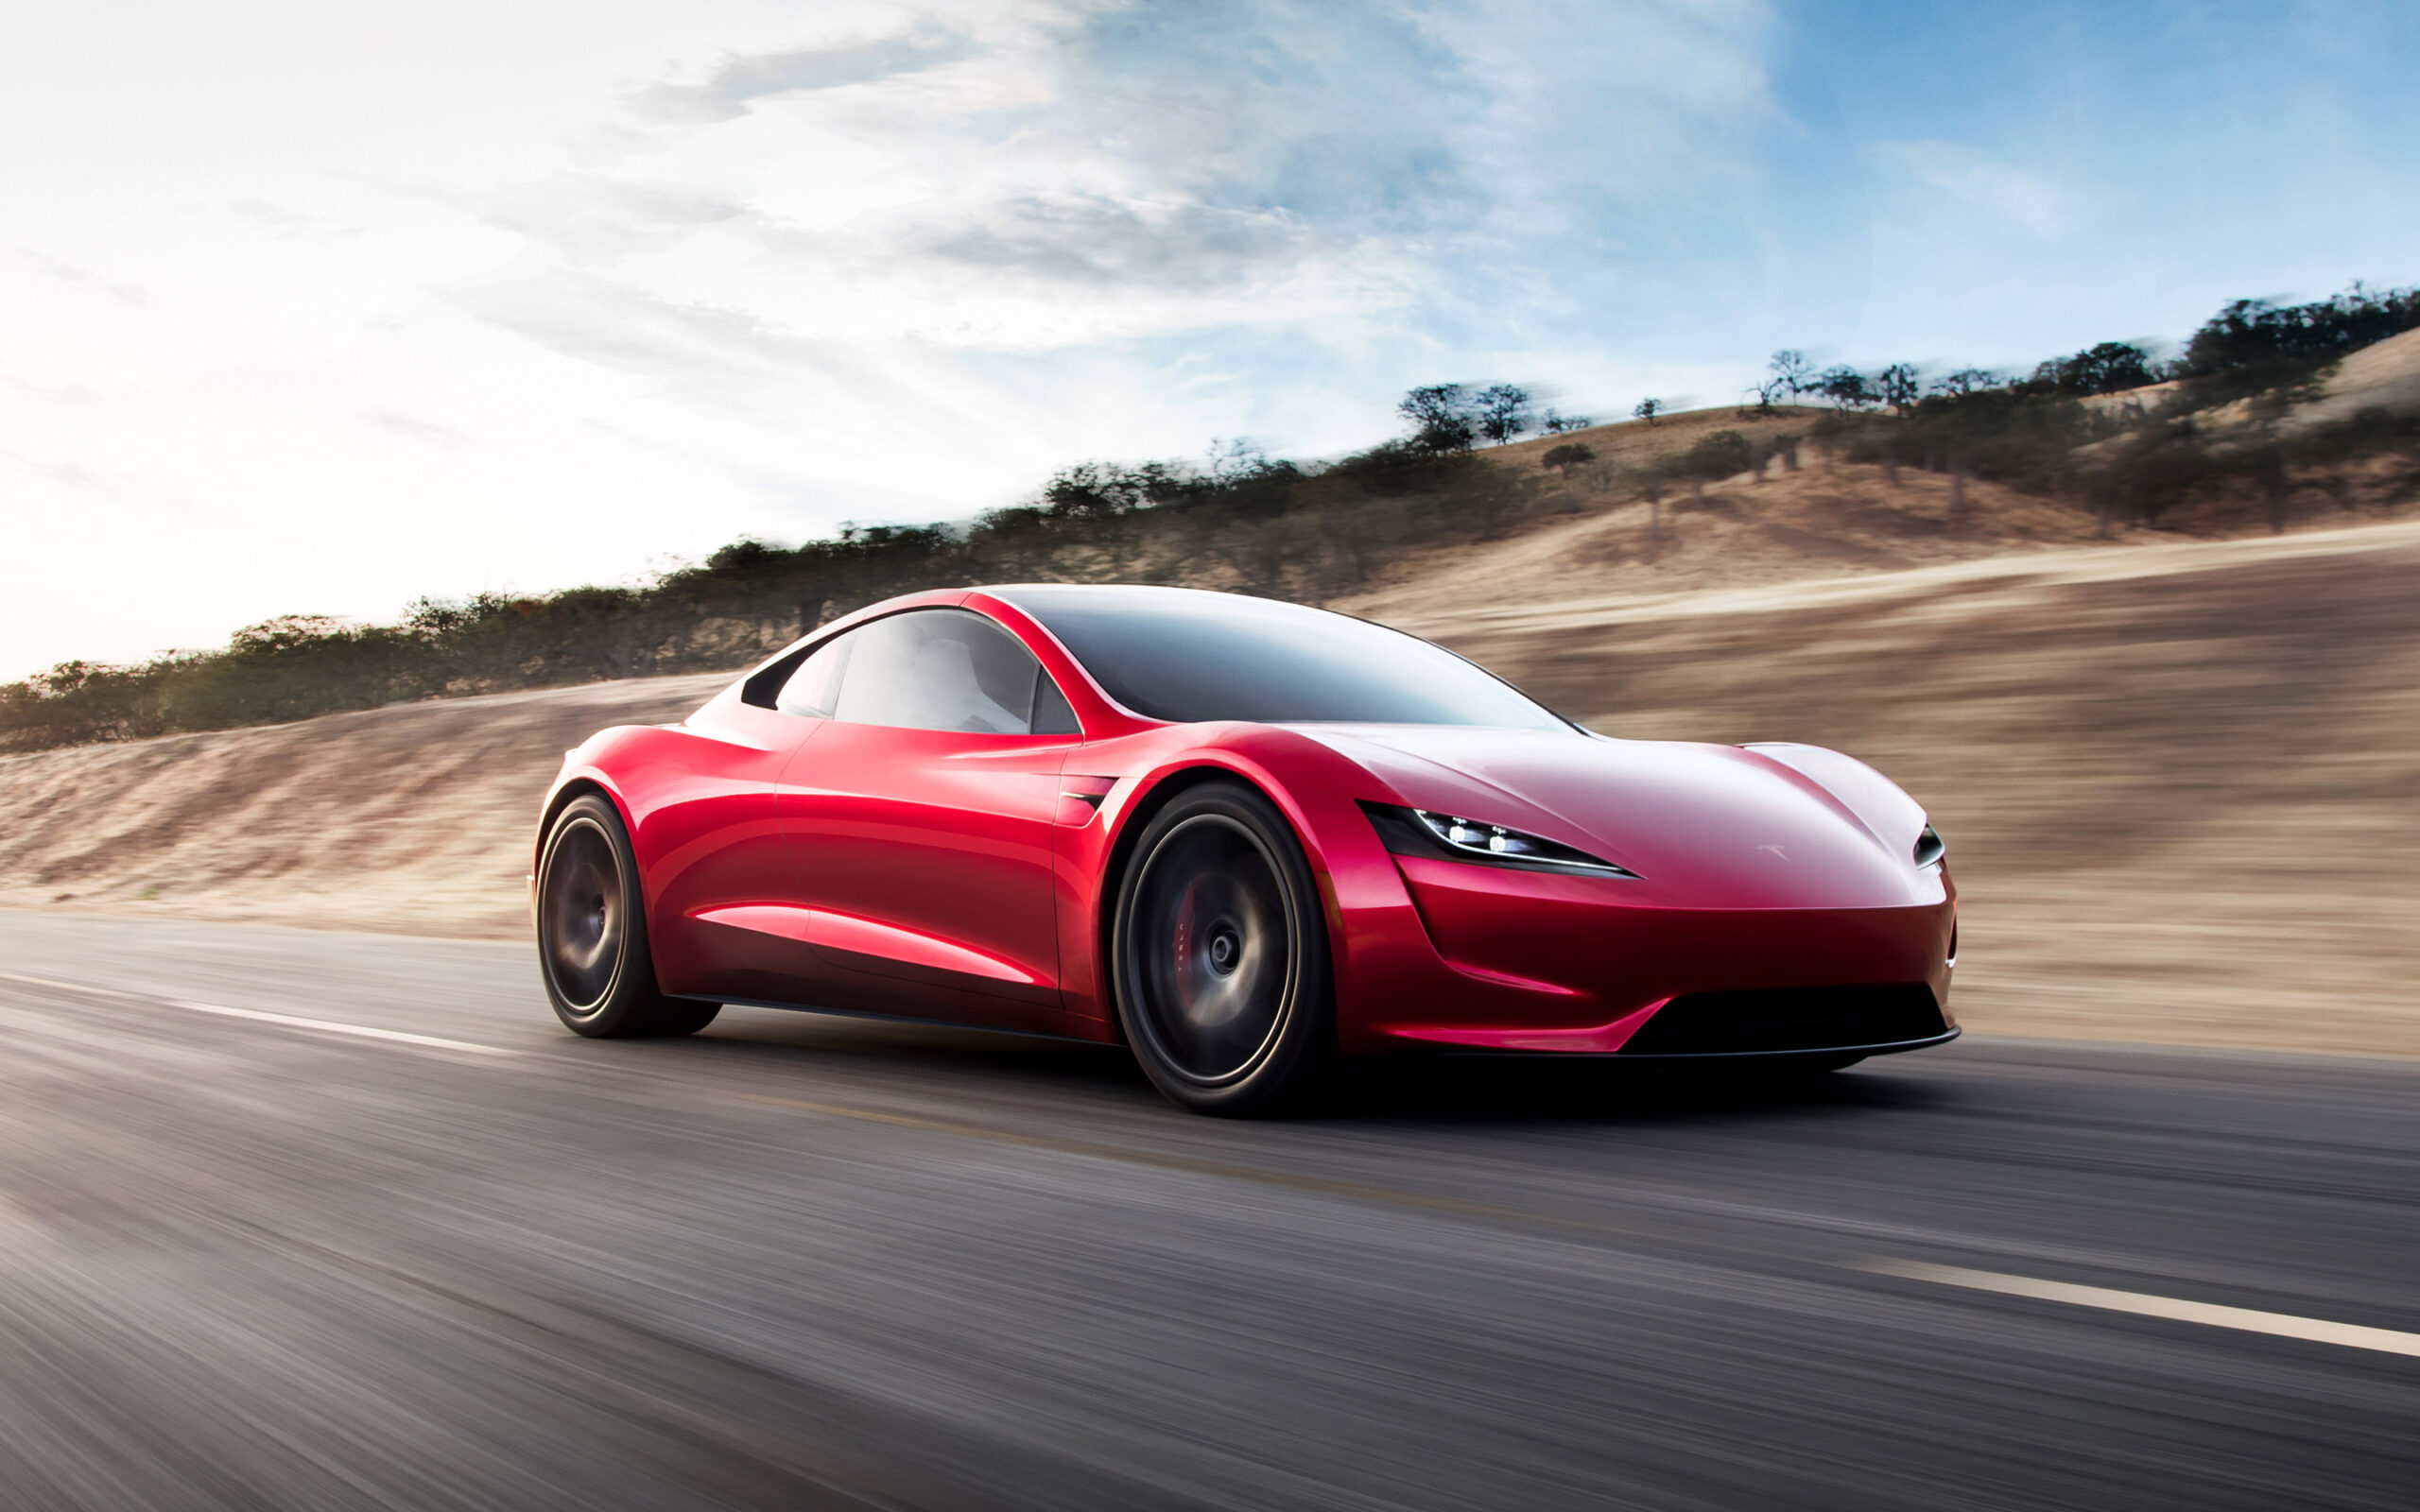 Musk confirms Tesla Roadster delayed to 2023, Cybertruck to late 2022Musk confirms Tesla Roadster delayed to 2023, Cybertruck to late 2022